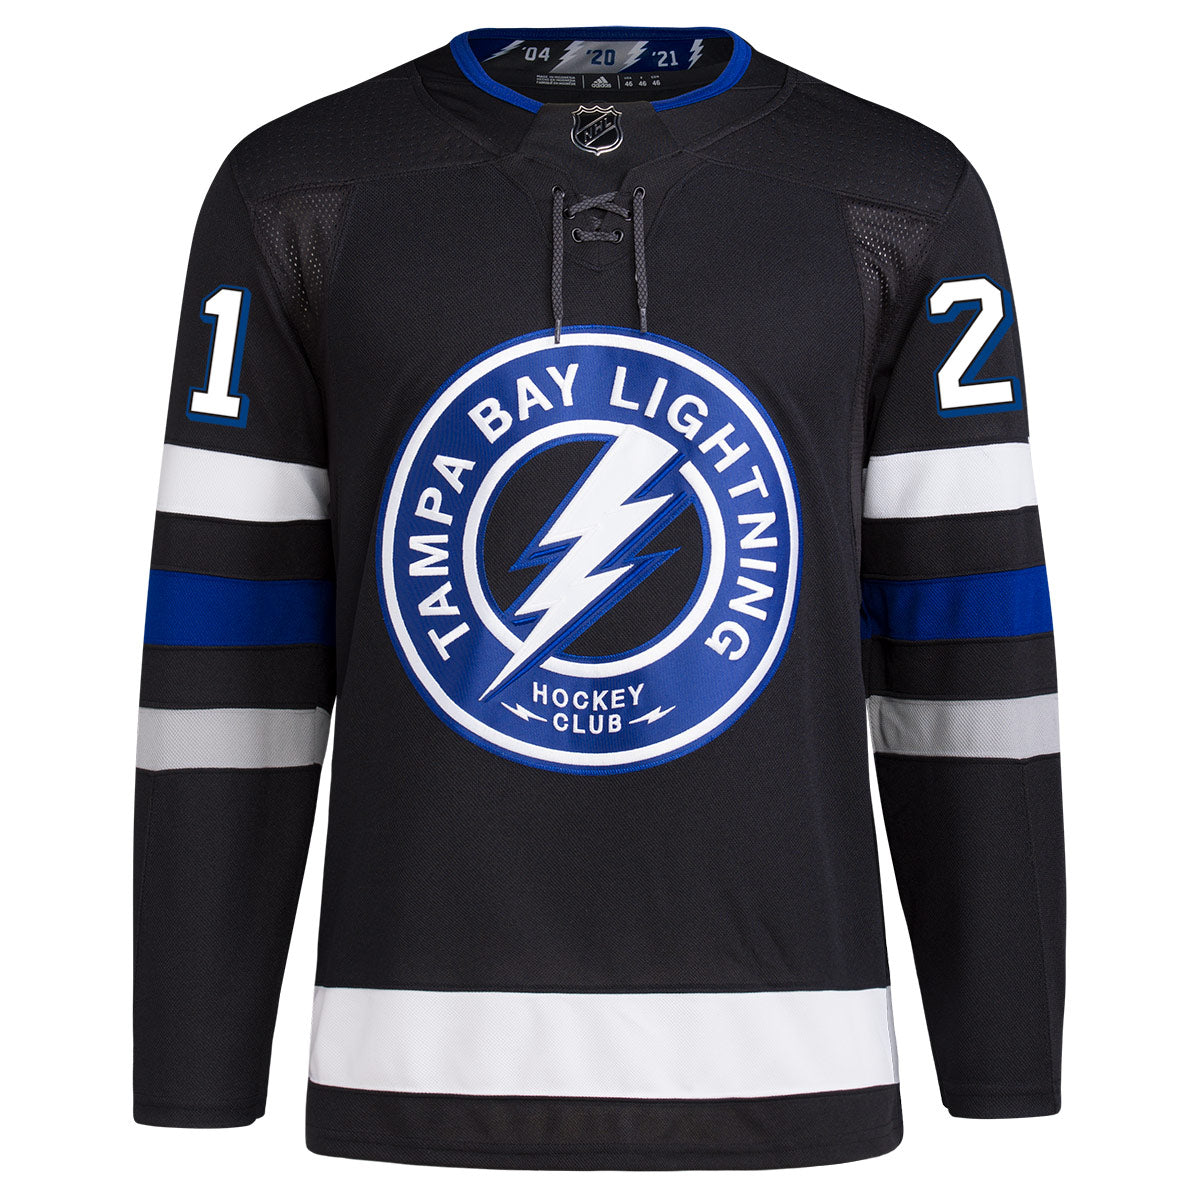 Adidas Tampa Bay Lightning No21 Brayden Point Black Alternate Authentic Women's 2020 Stanley Cup Champions Stitched NHL Jersey